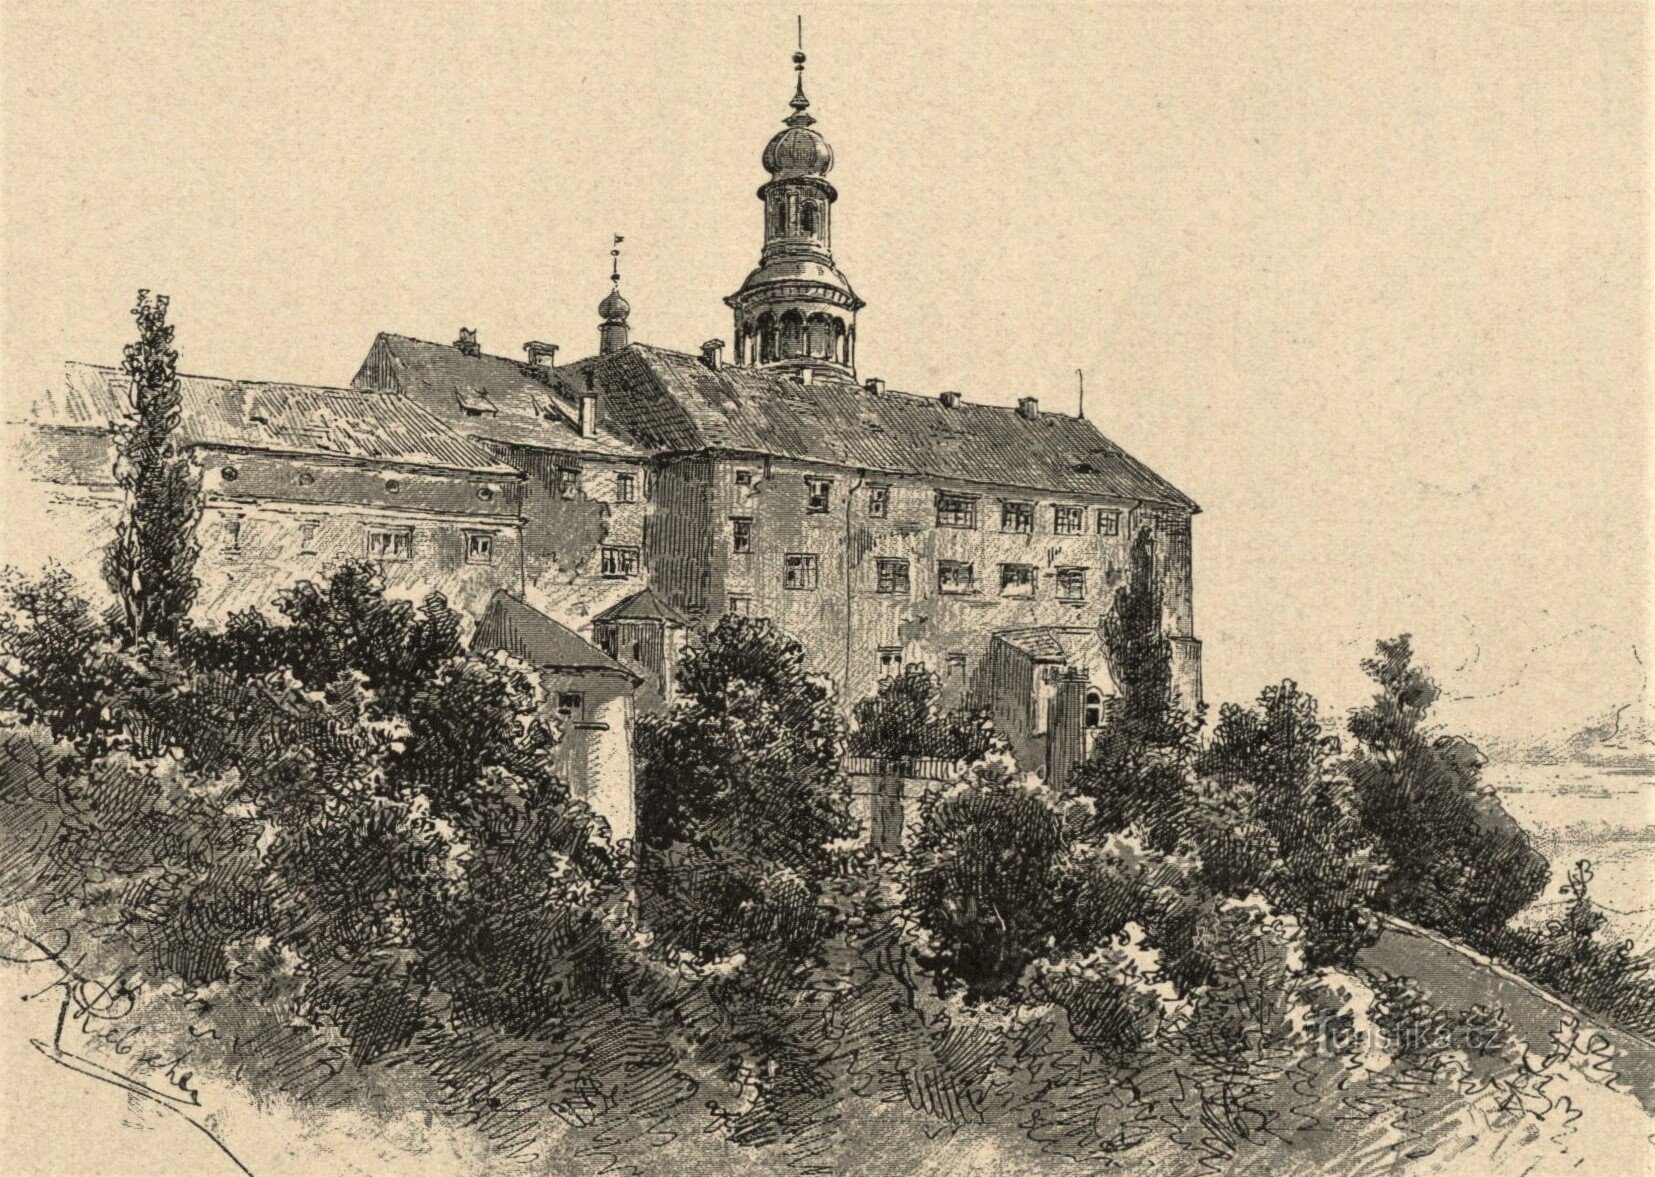 Castle in Náchod in the second half of the 2th century